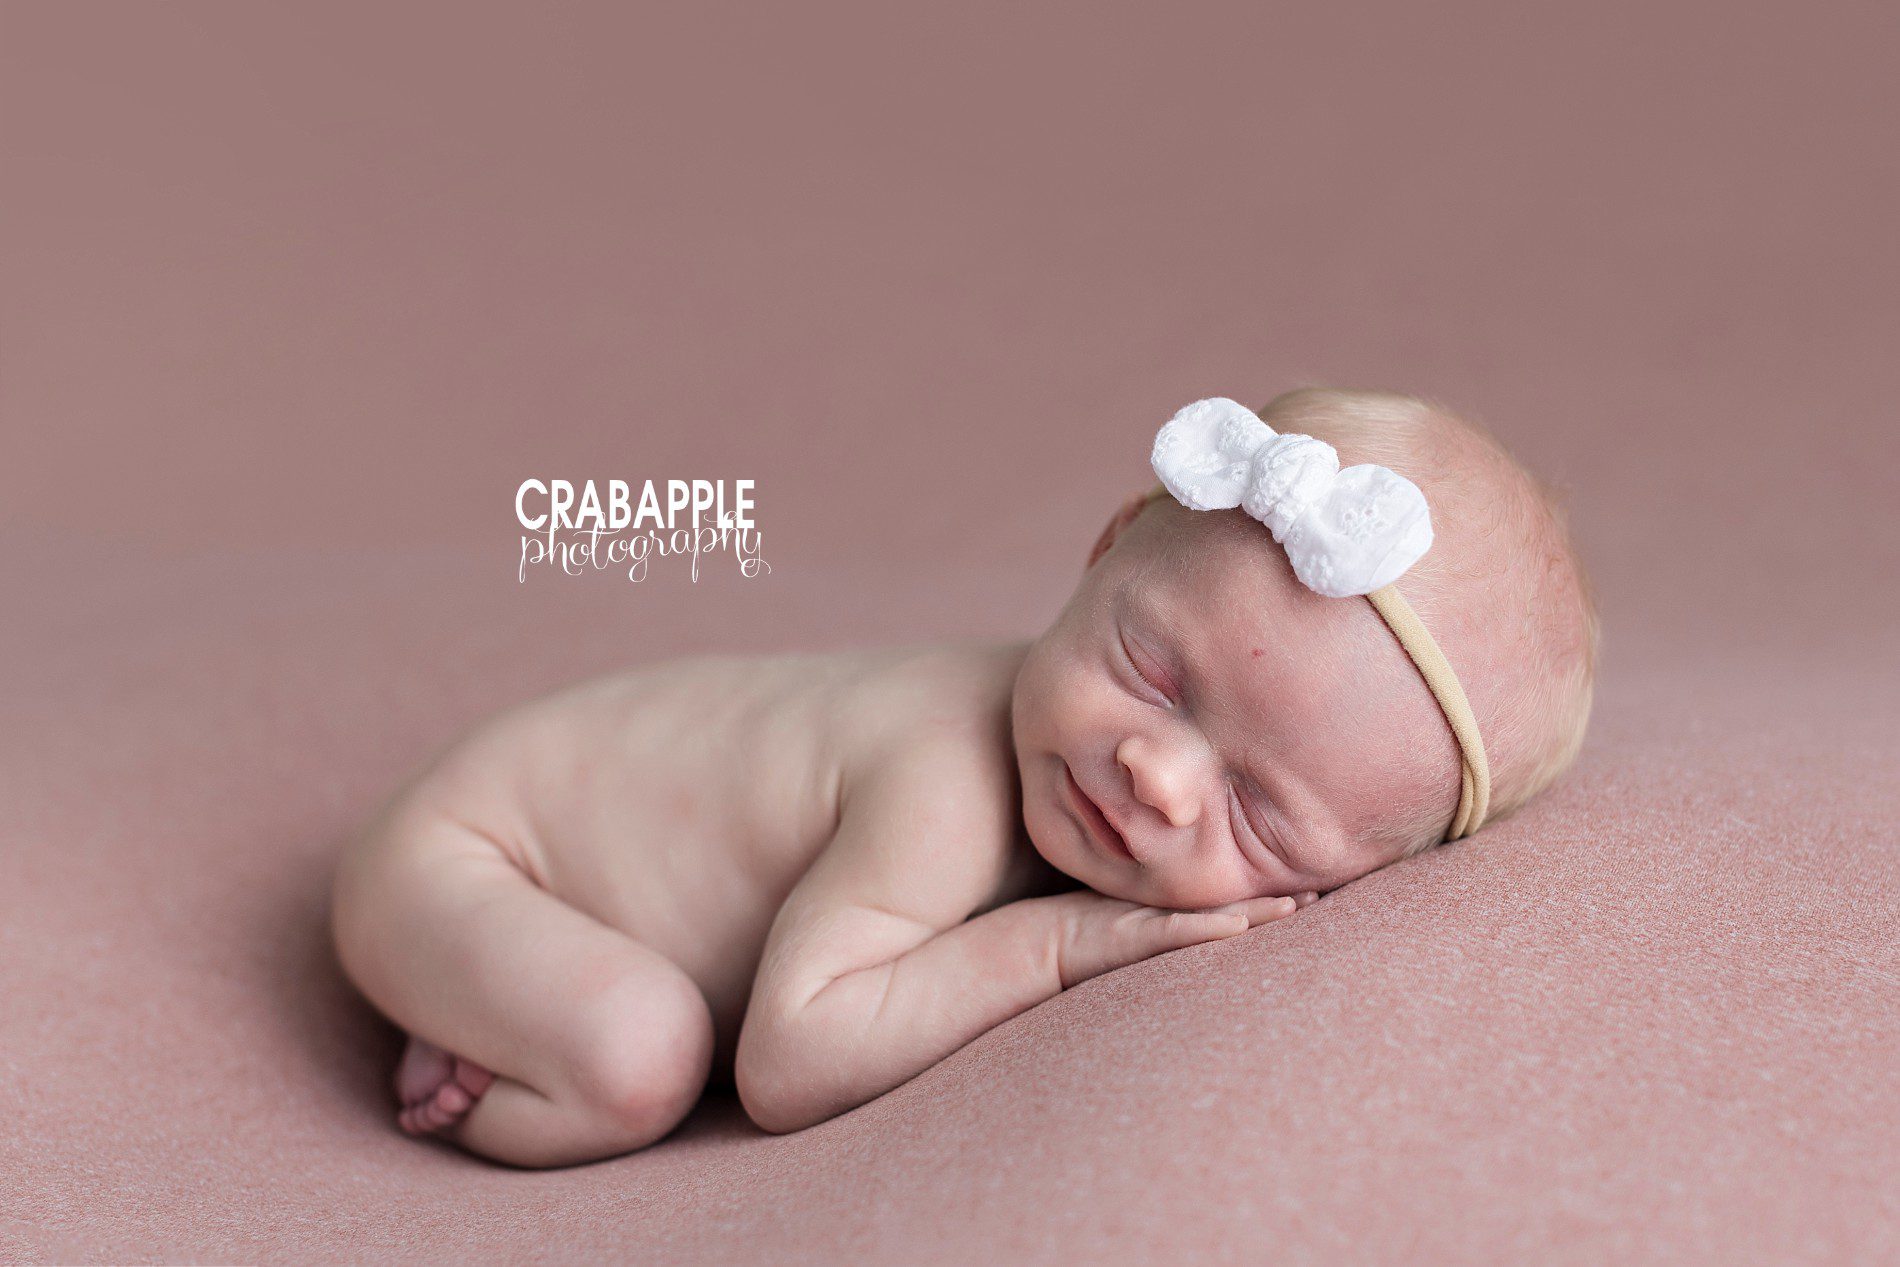 Newborn baby girl portraits with a light pink blanket as the background. Baby girl wears a white bow headband.